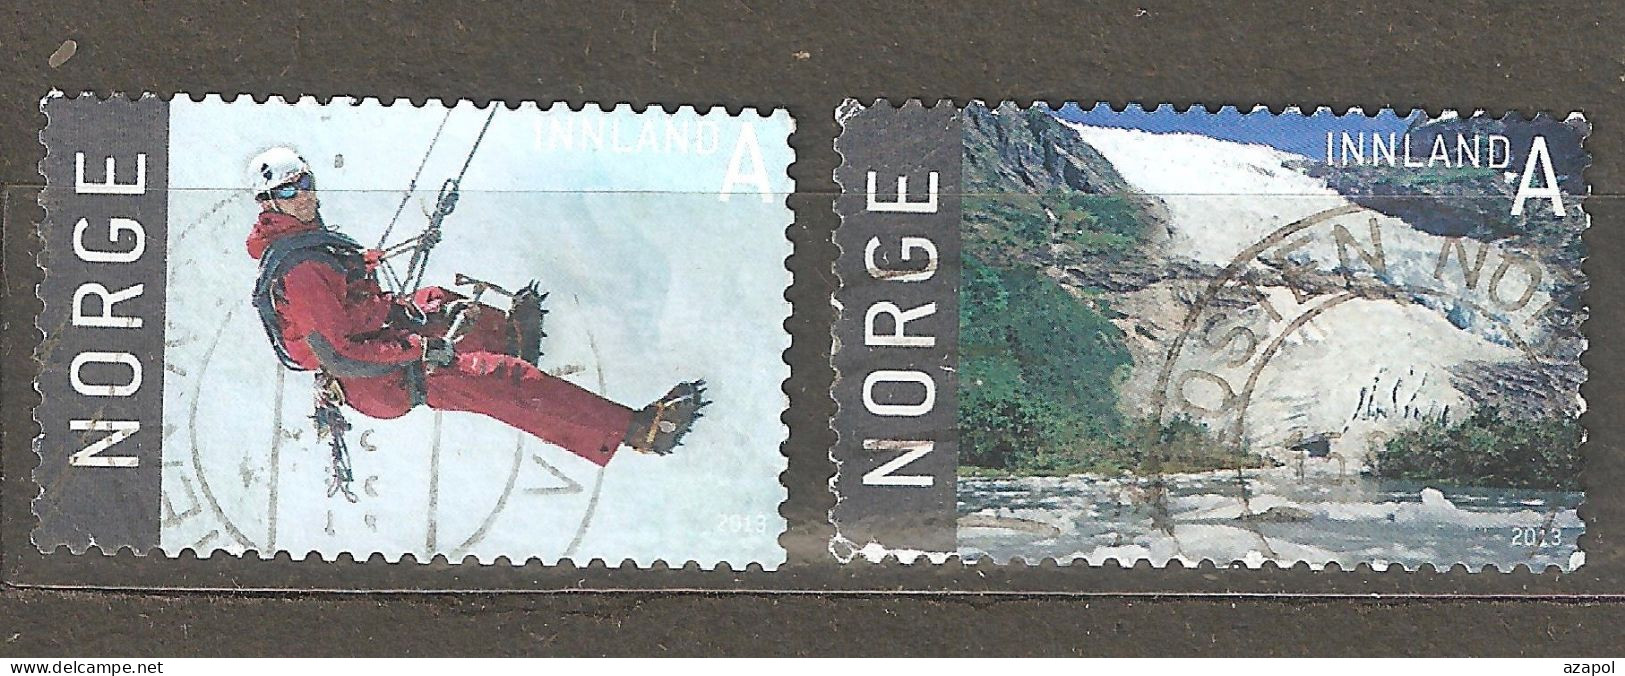 Norway: 2 Used Stamps From A Set, Tourism-a Climber On A Gletcher, Waterfall, 2013, Mi#1809-10 - Usati